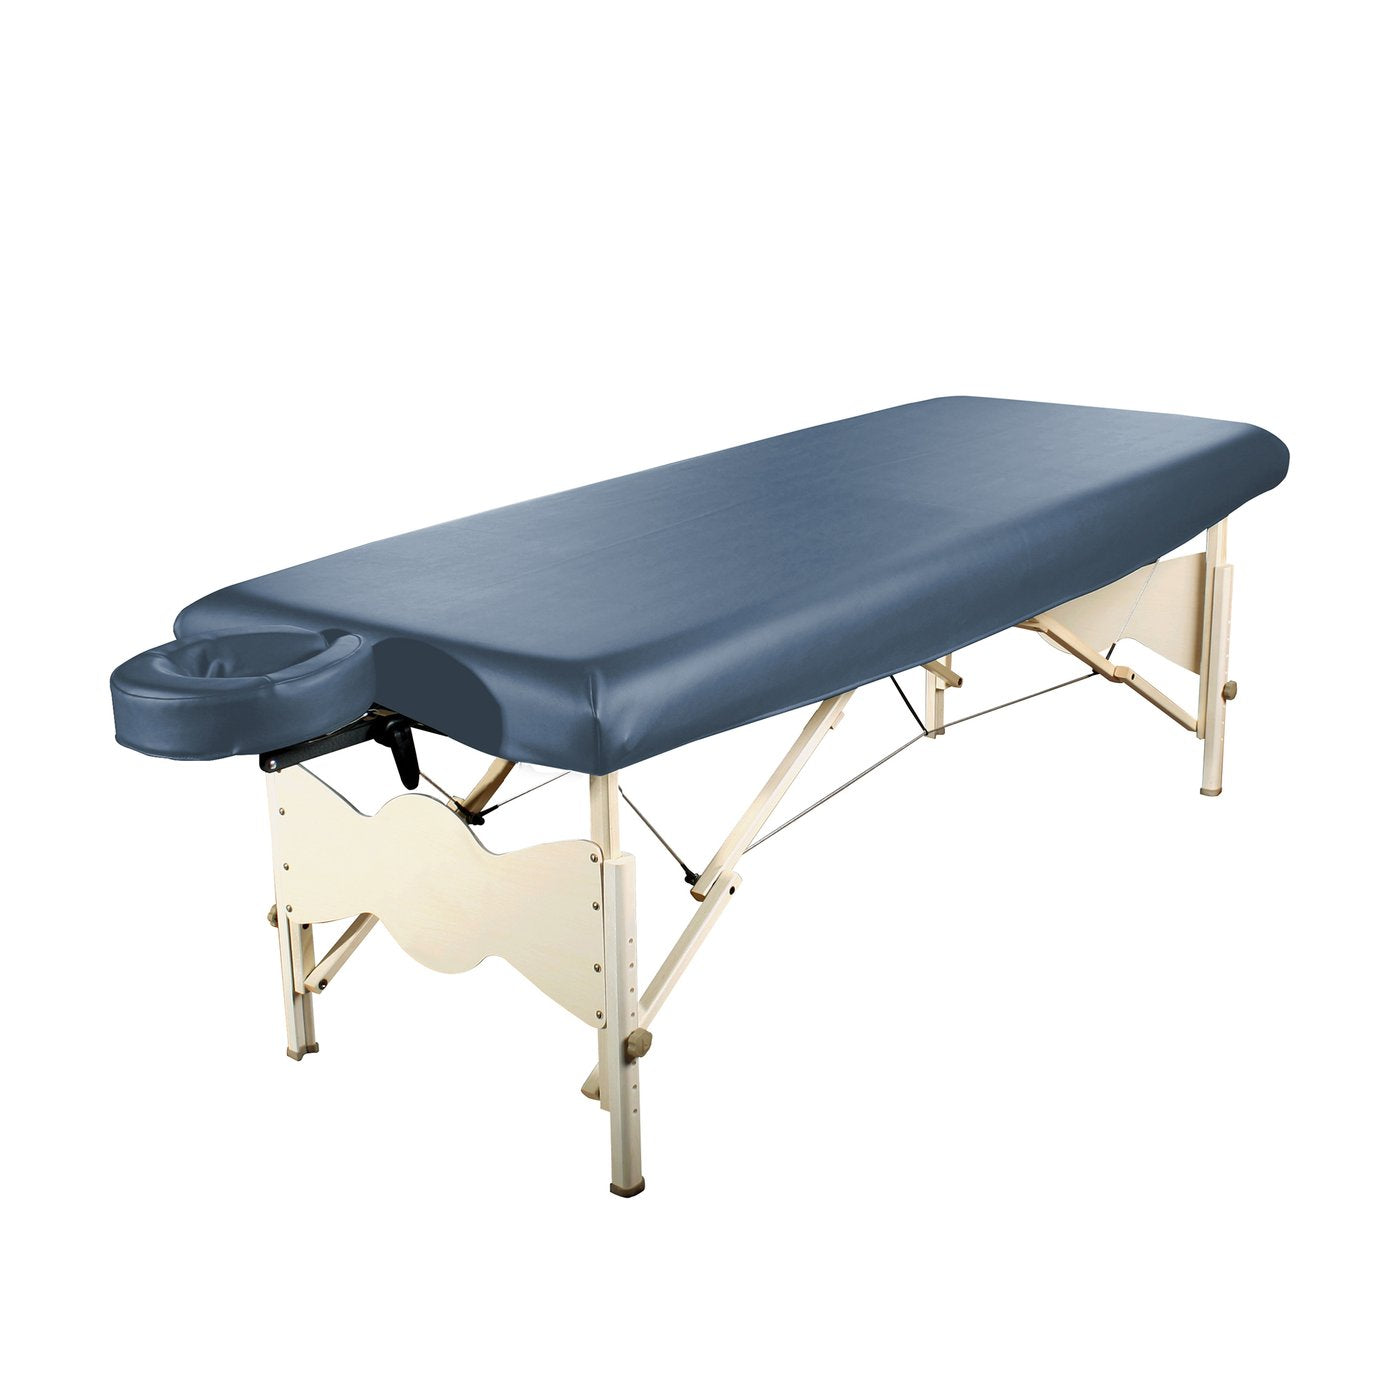 Universal Fabric Fitted PU Vinyl leather Protection Cover for Massage Tables